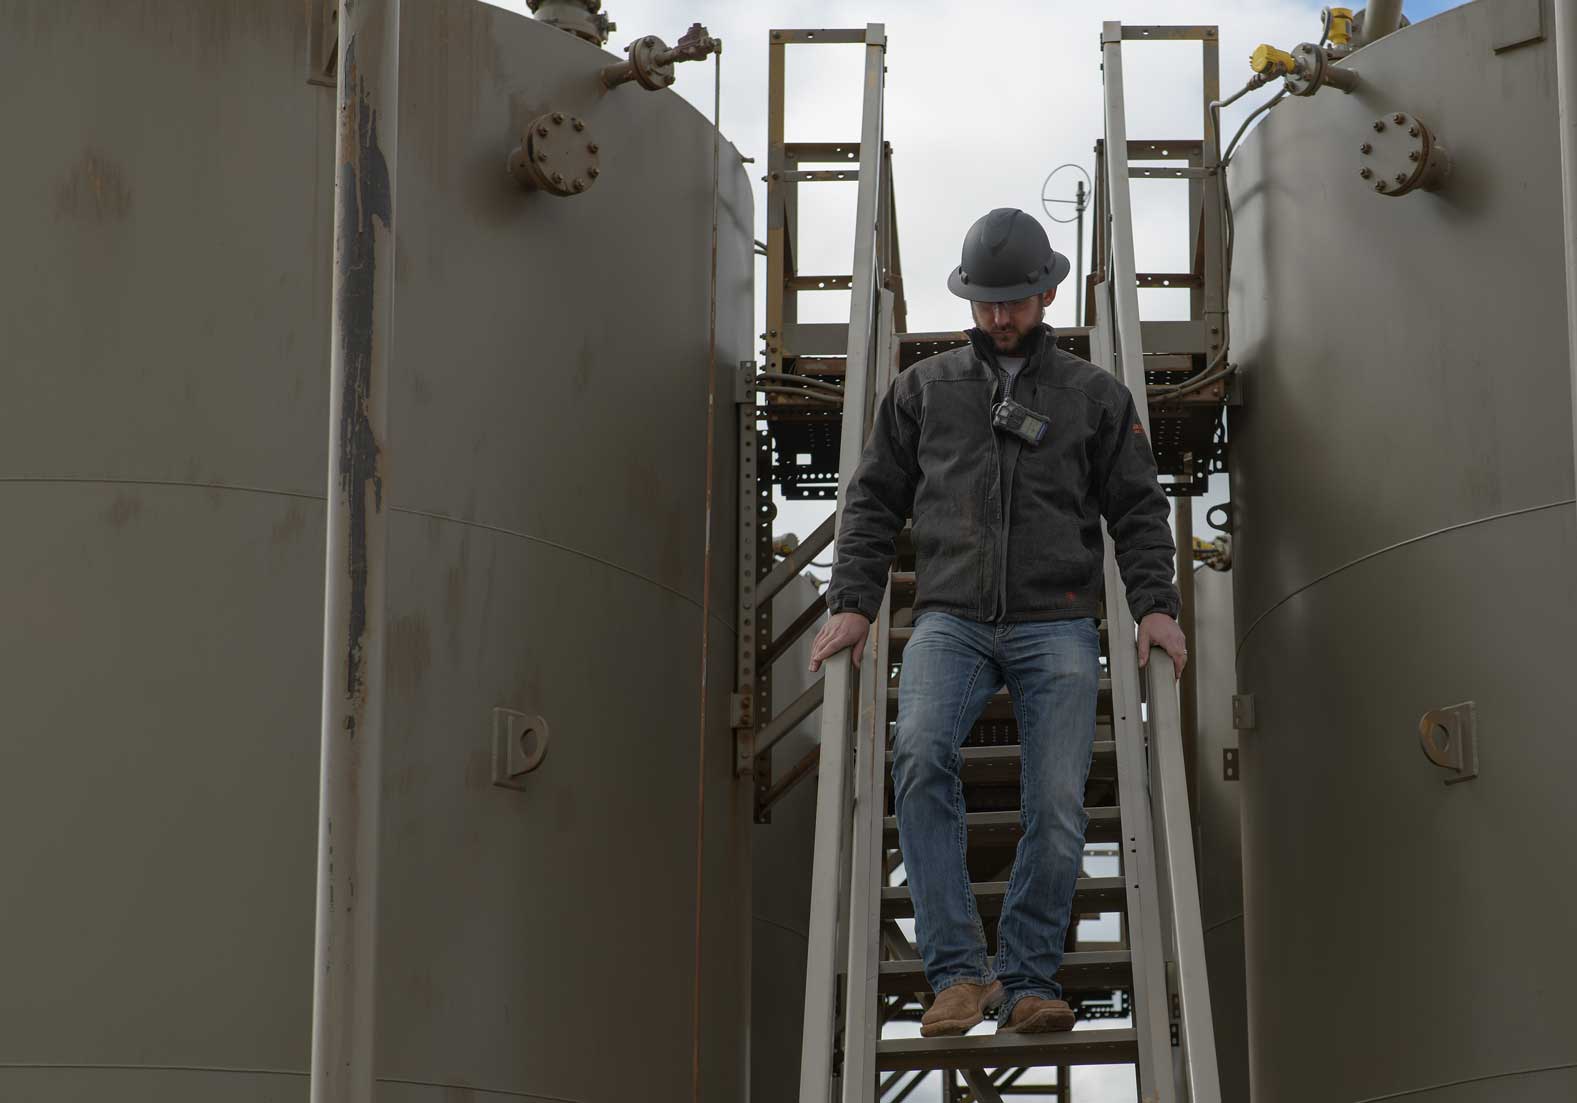 Male worker dressed in jeans, dark jacket, and black hard hat descending the stairs between two large metal tanks